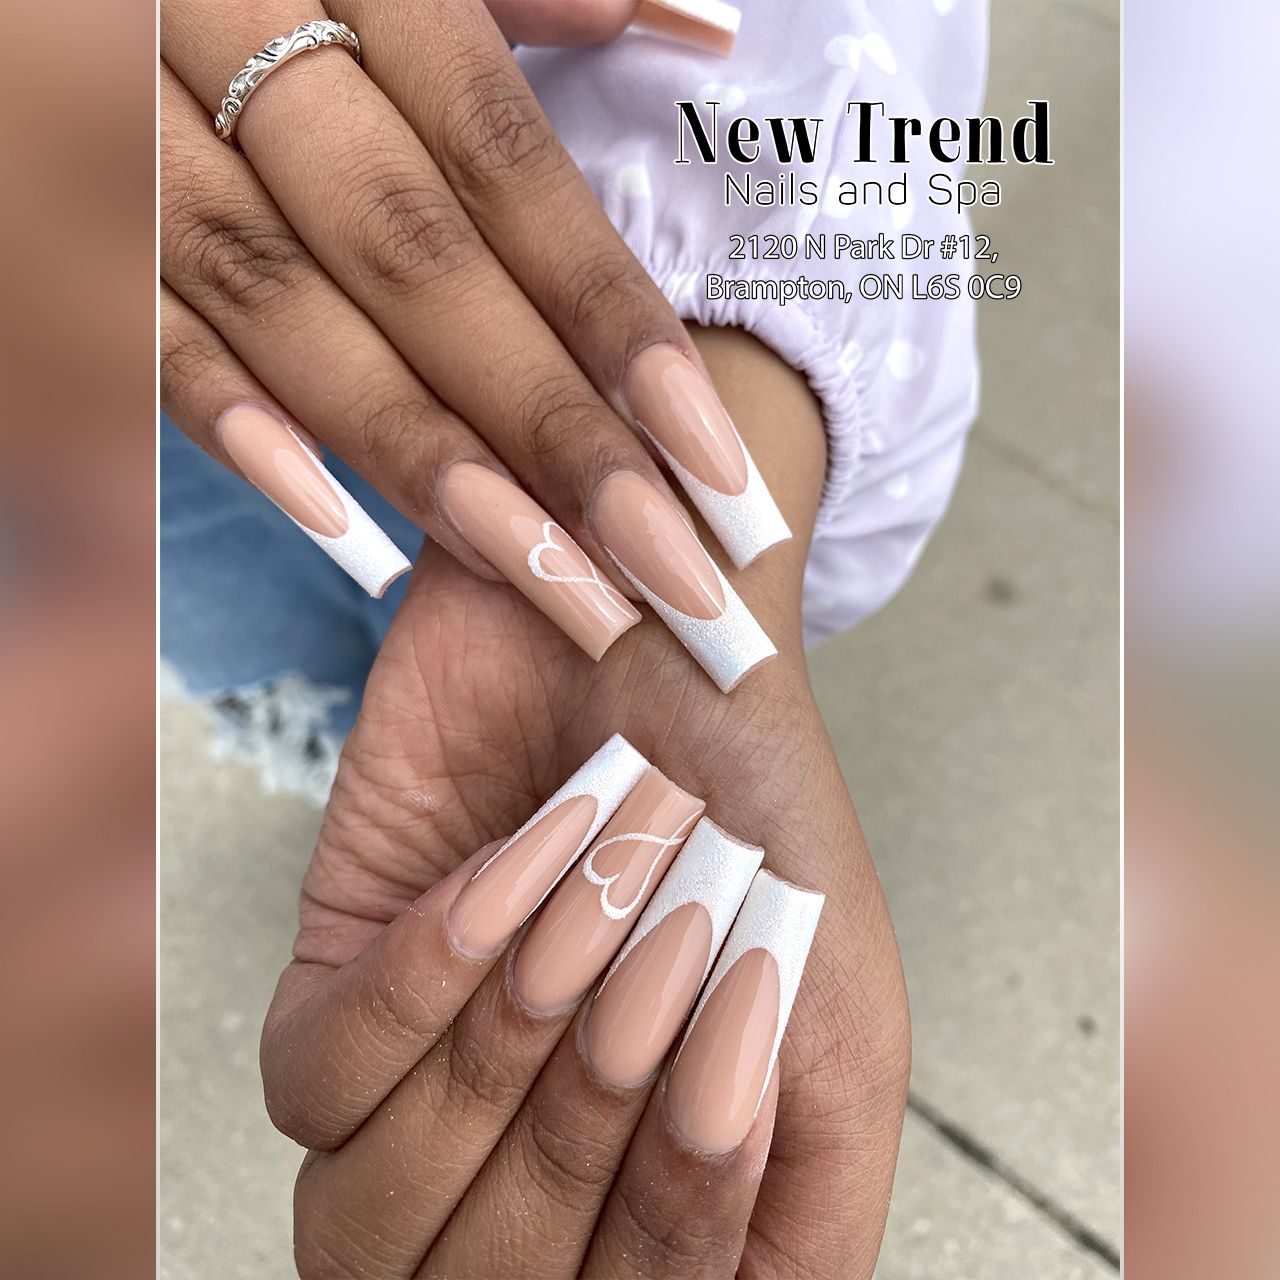 New Trend Nails and Spa in Brampton, ON L6S 0C9, Canada